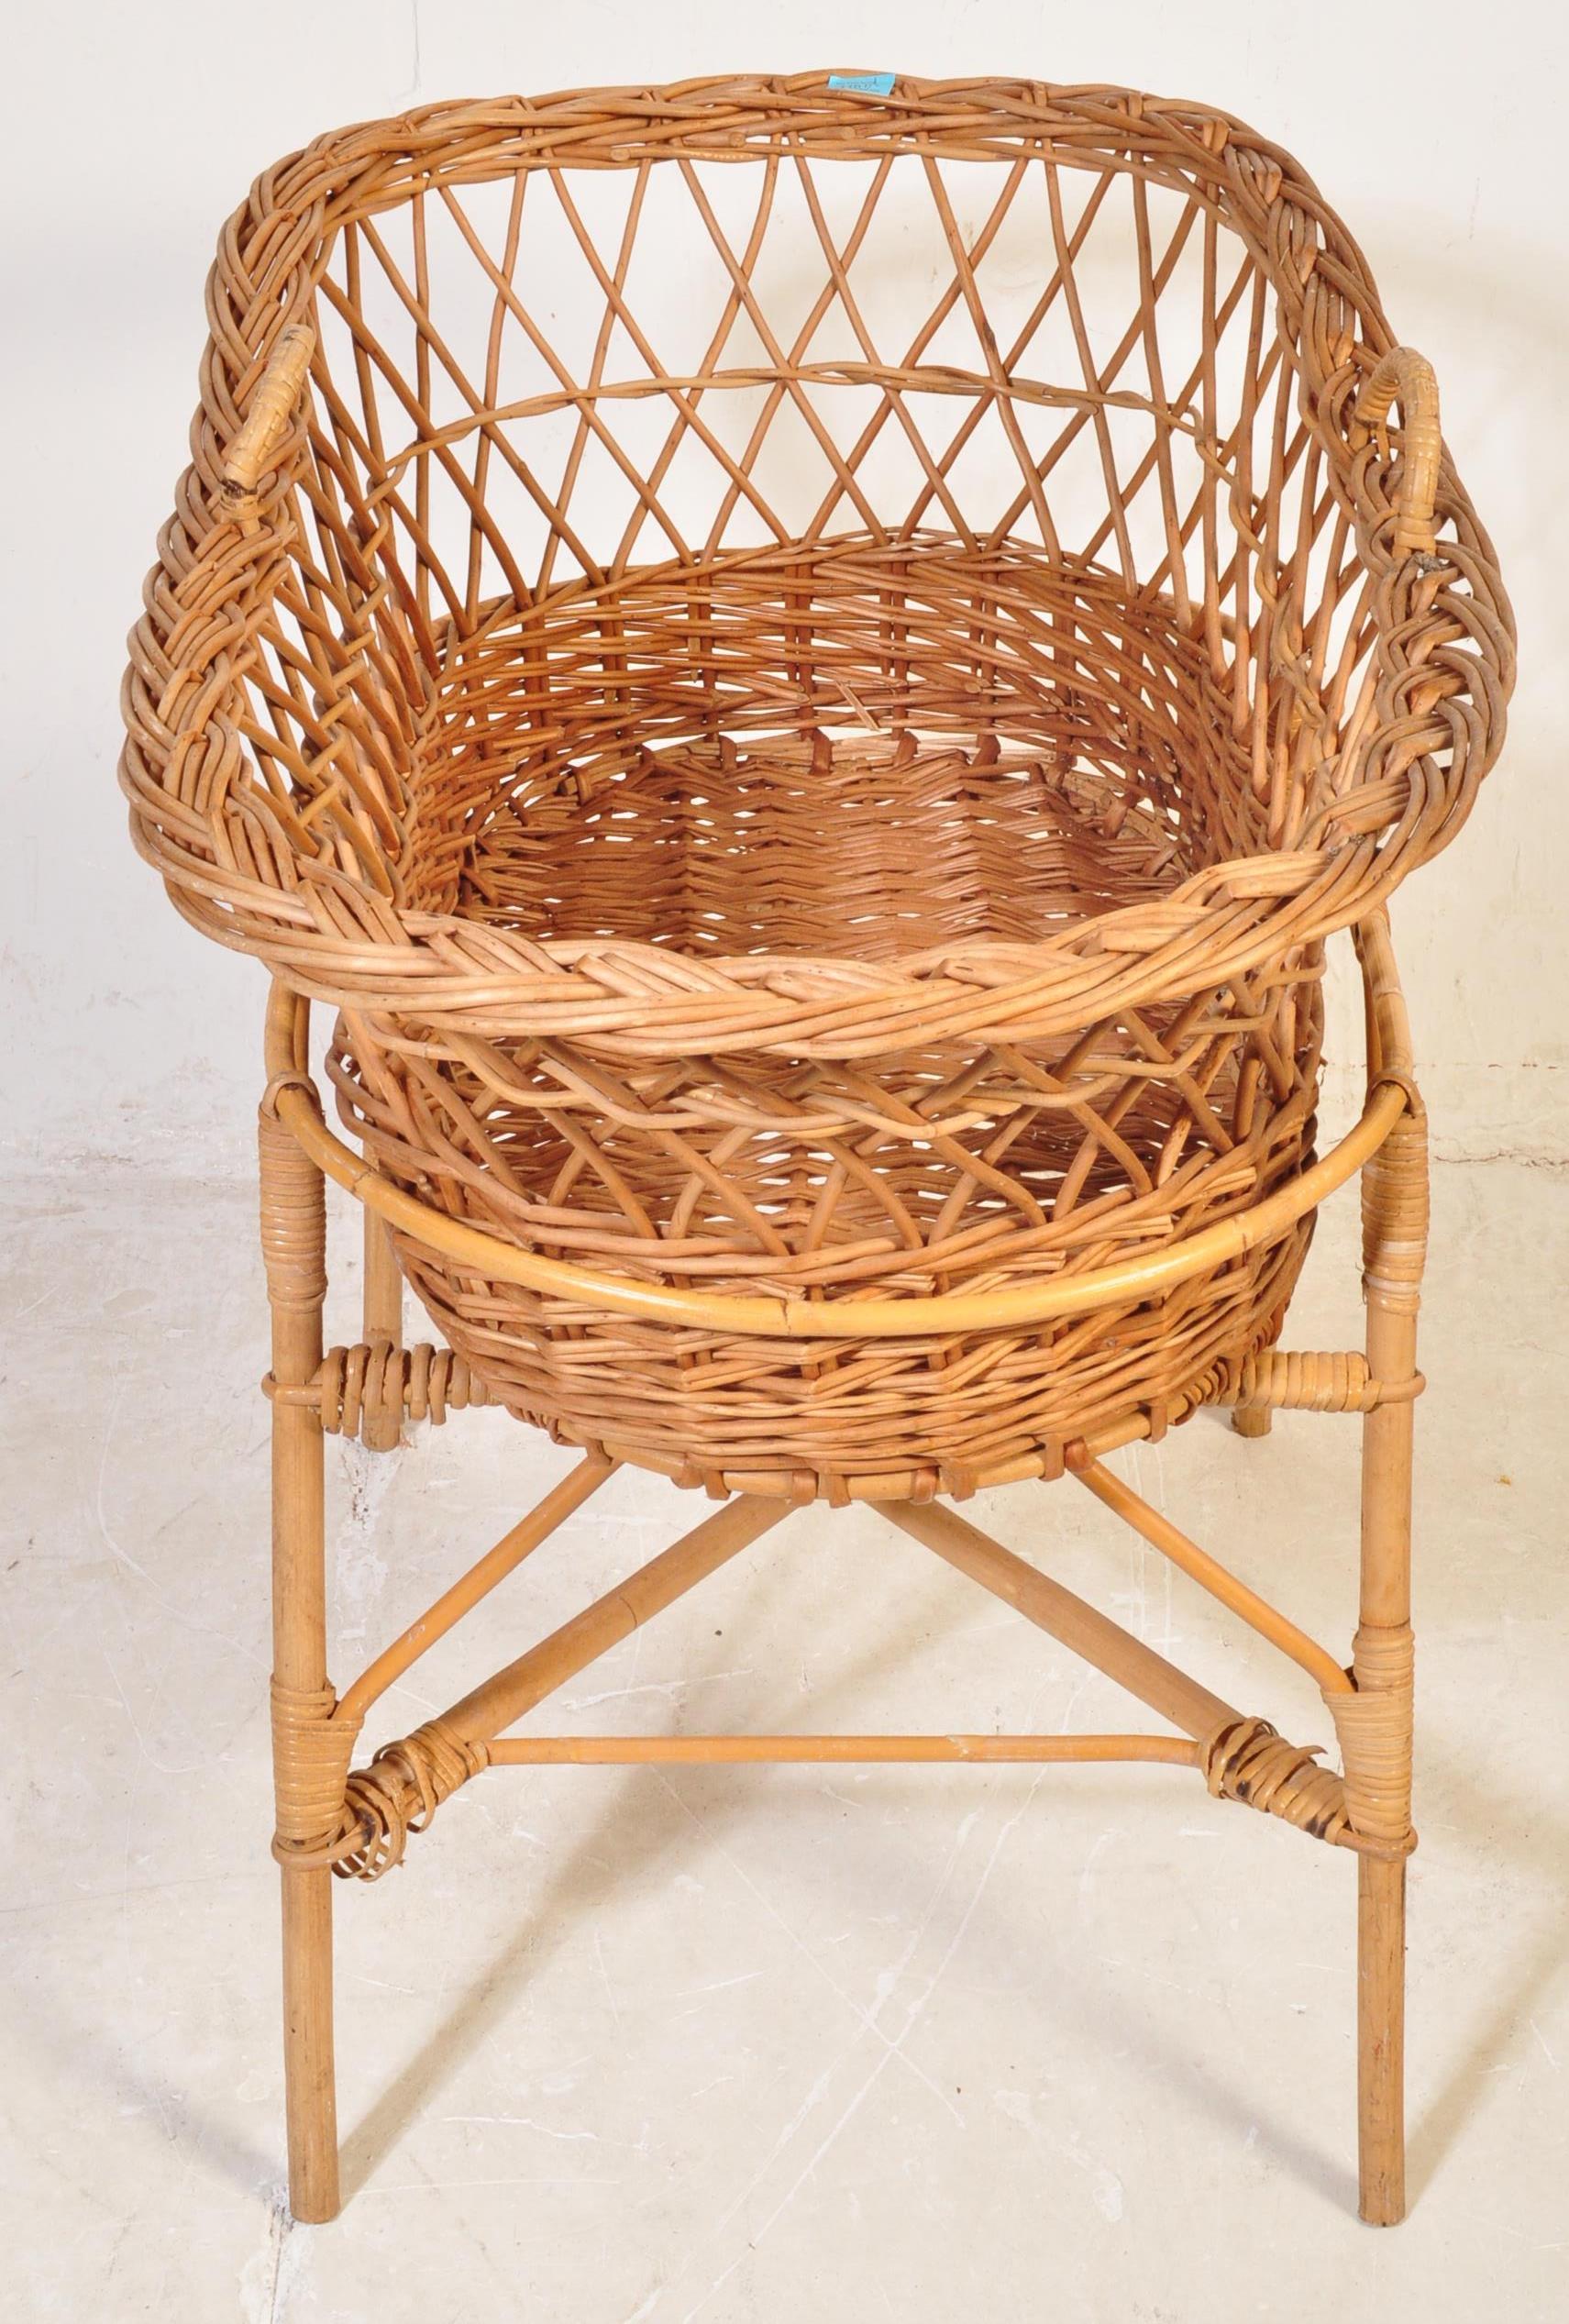 A RETRO VINTAGE CANED WICKER BAMBOO MOSES BASKET - Image 3 of 6